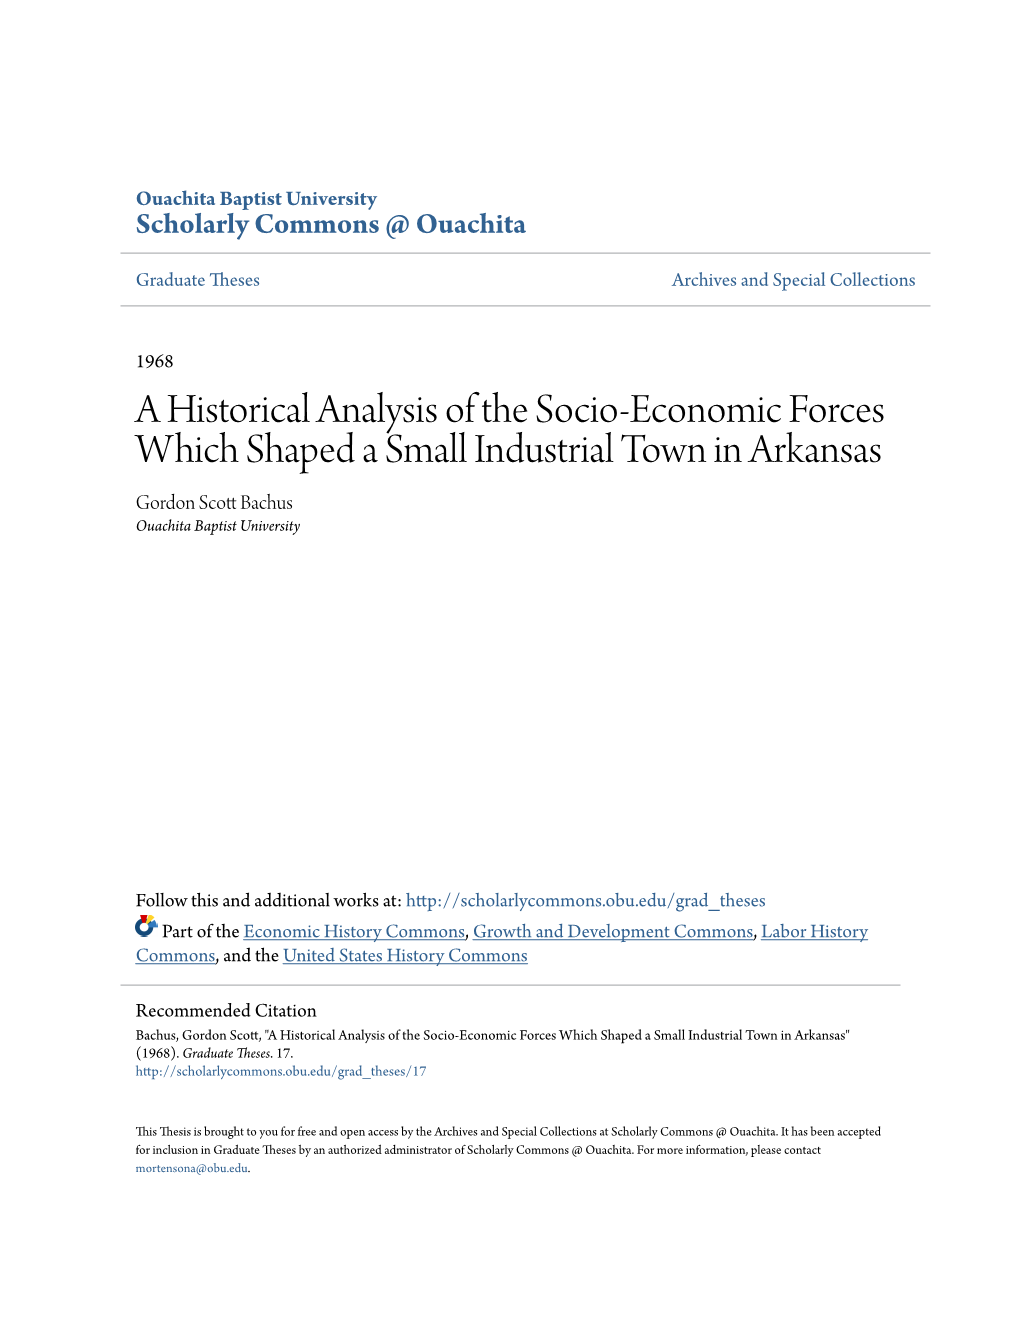 A Historical Analysis of the Socio-Economic Forces Which Shaped a Small Industrial Town in Arkansas Gordon Scott Ab Chus Ouachita Baptist University